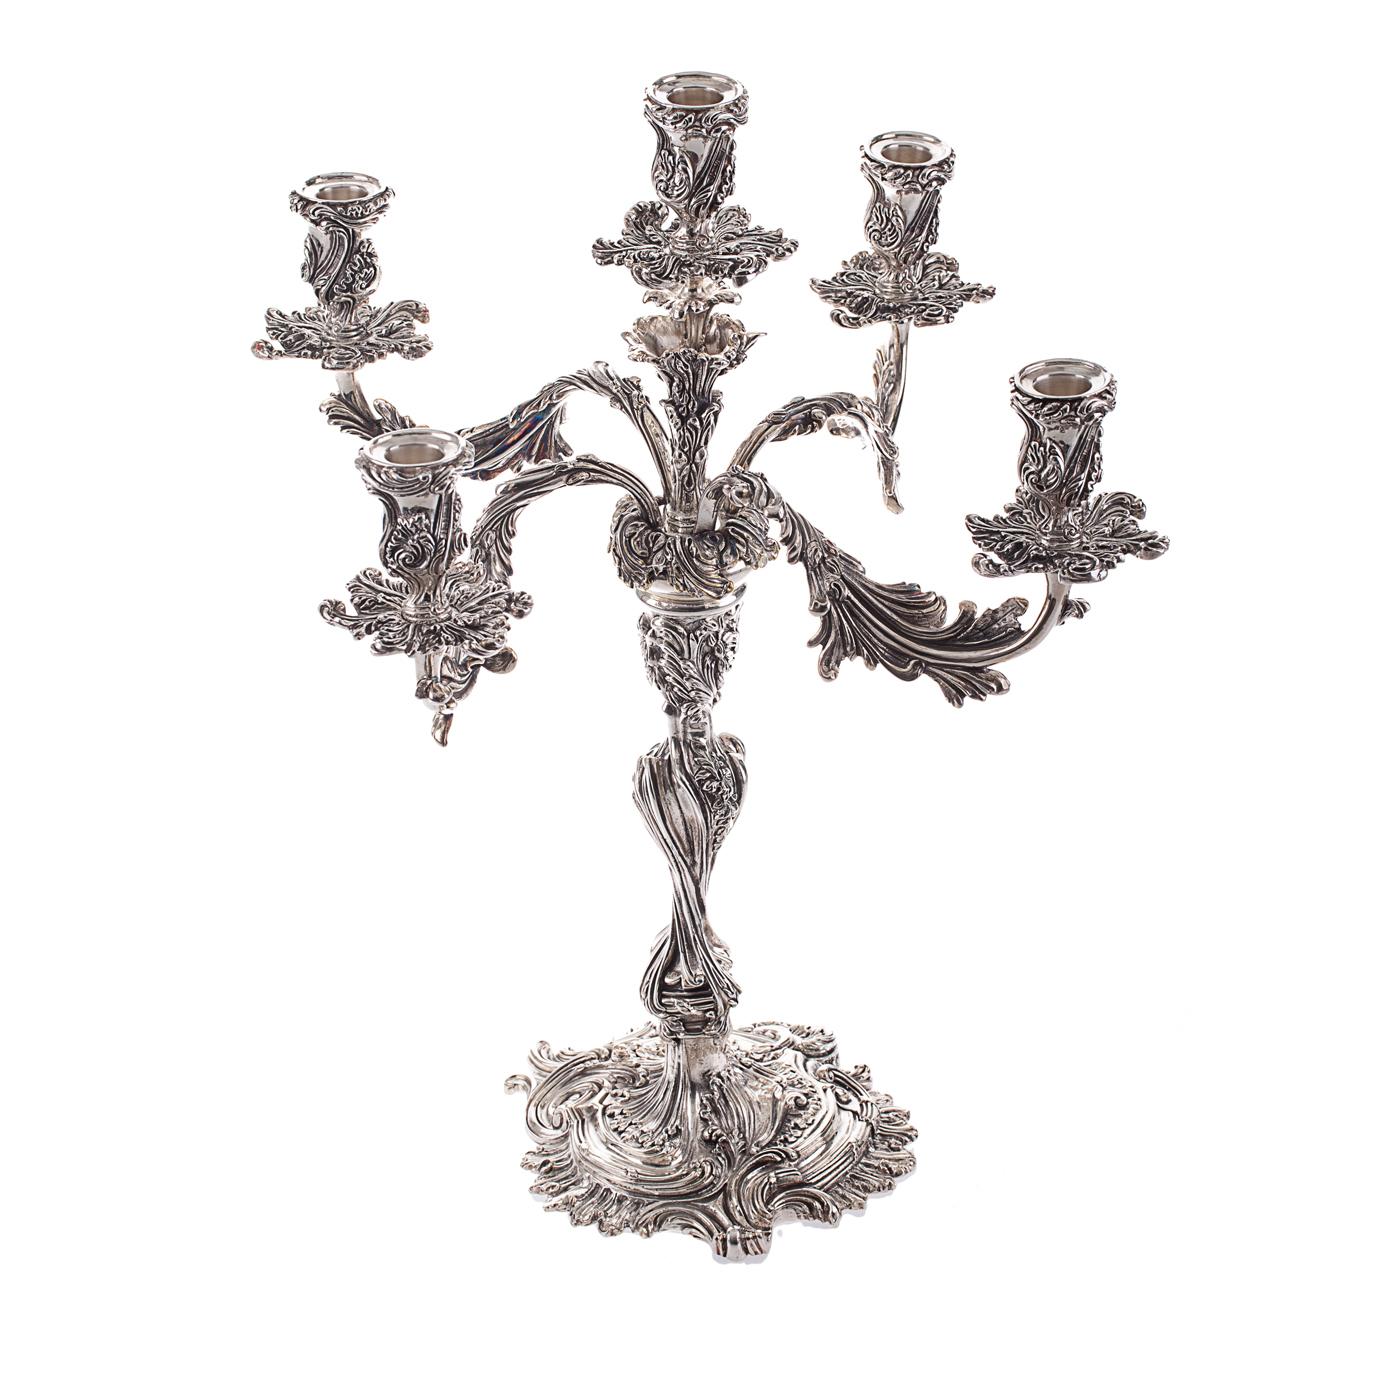 Chiseled with intricacy in the Baroque tradition, this sterling silver five-arm candelabra features magnificent floral motifs. The Florentine silversmith atelier Pampaloni achieved an unparalleled level of detail in this signature piece, an object